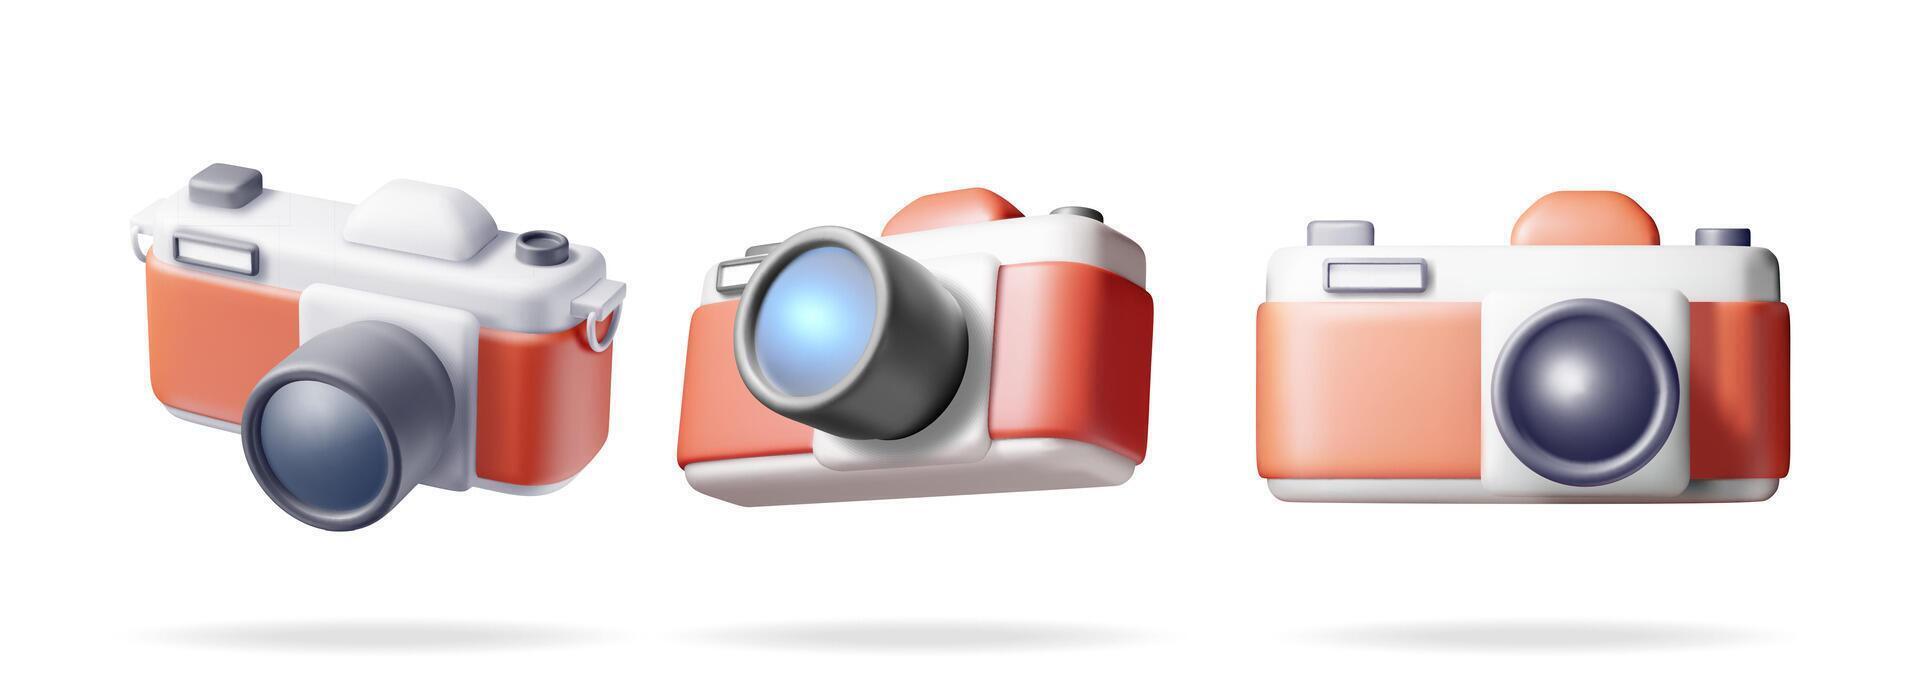 3d Set of Vintage Camera Isolated on White. Render Collection of Classic Photo Camera Icon. Concept of Vacation or Holiday, Time to Travel. Realistic Illustration vector